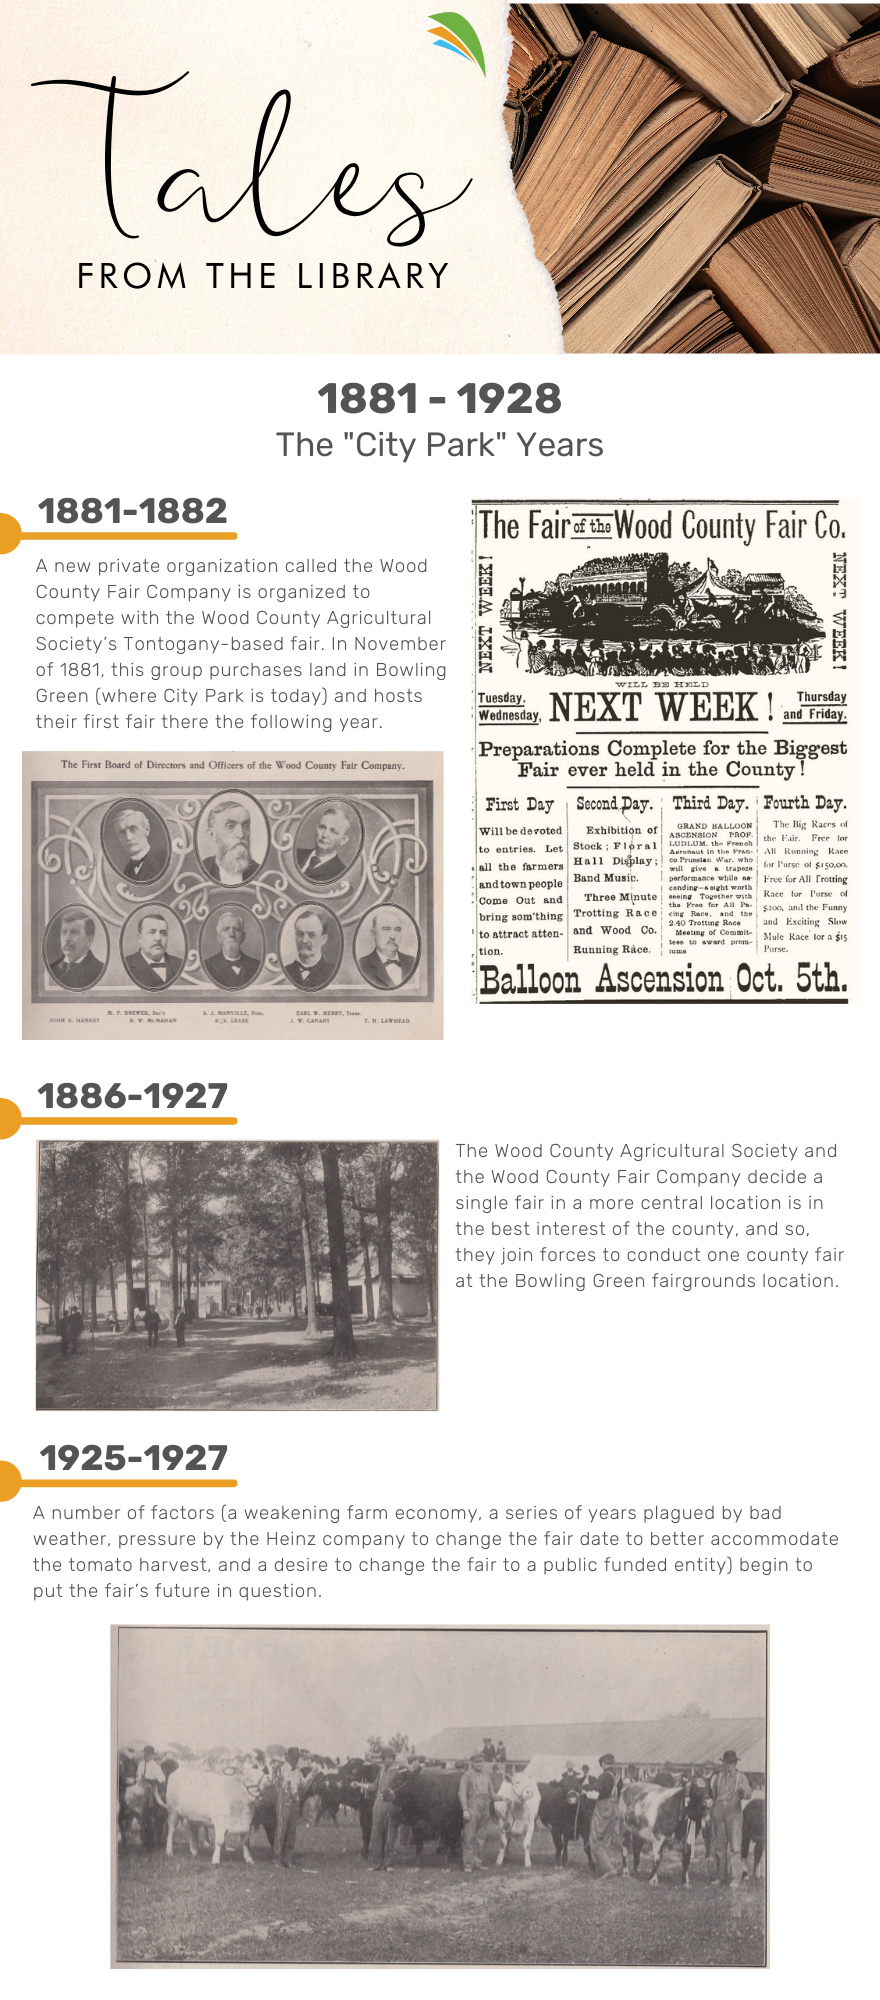 A timeline of events during the fair from 1881-1928